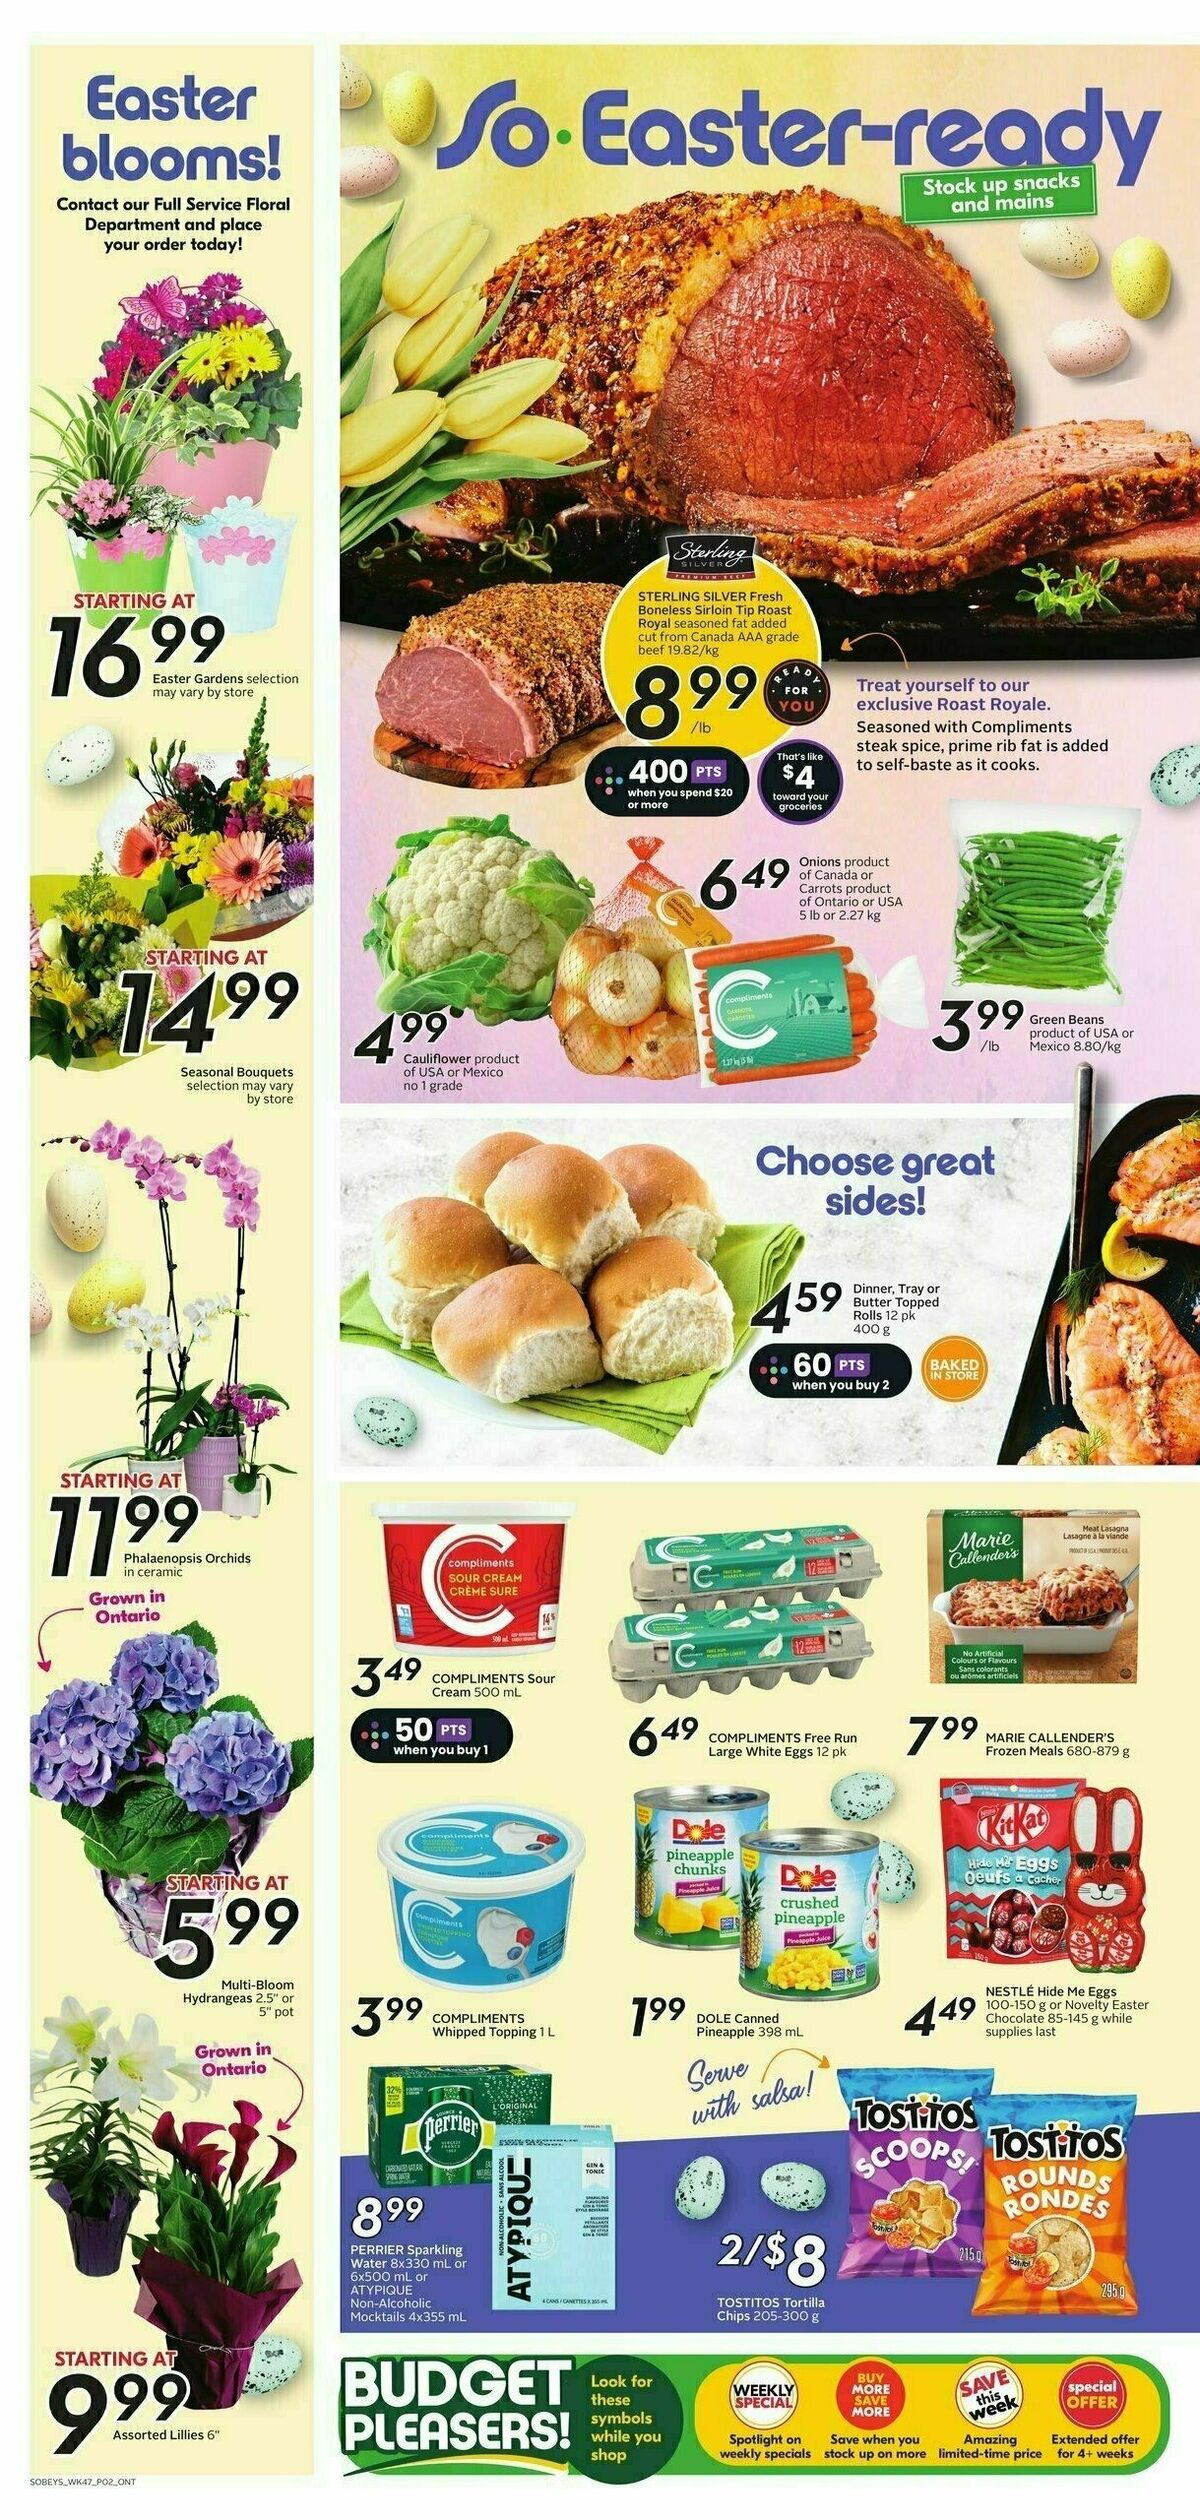 Sobeys Flyer from March 21